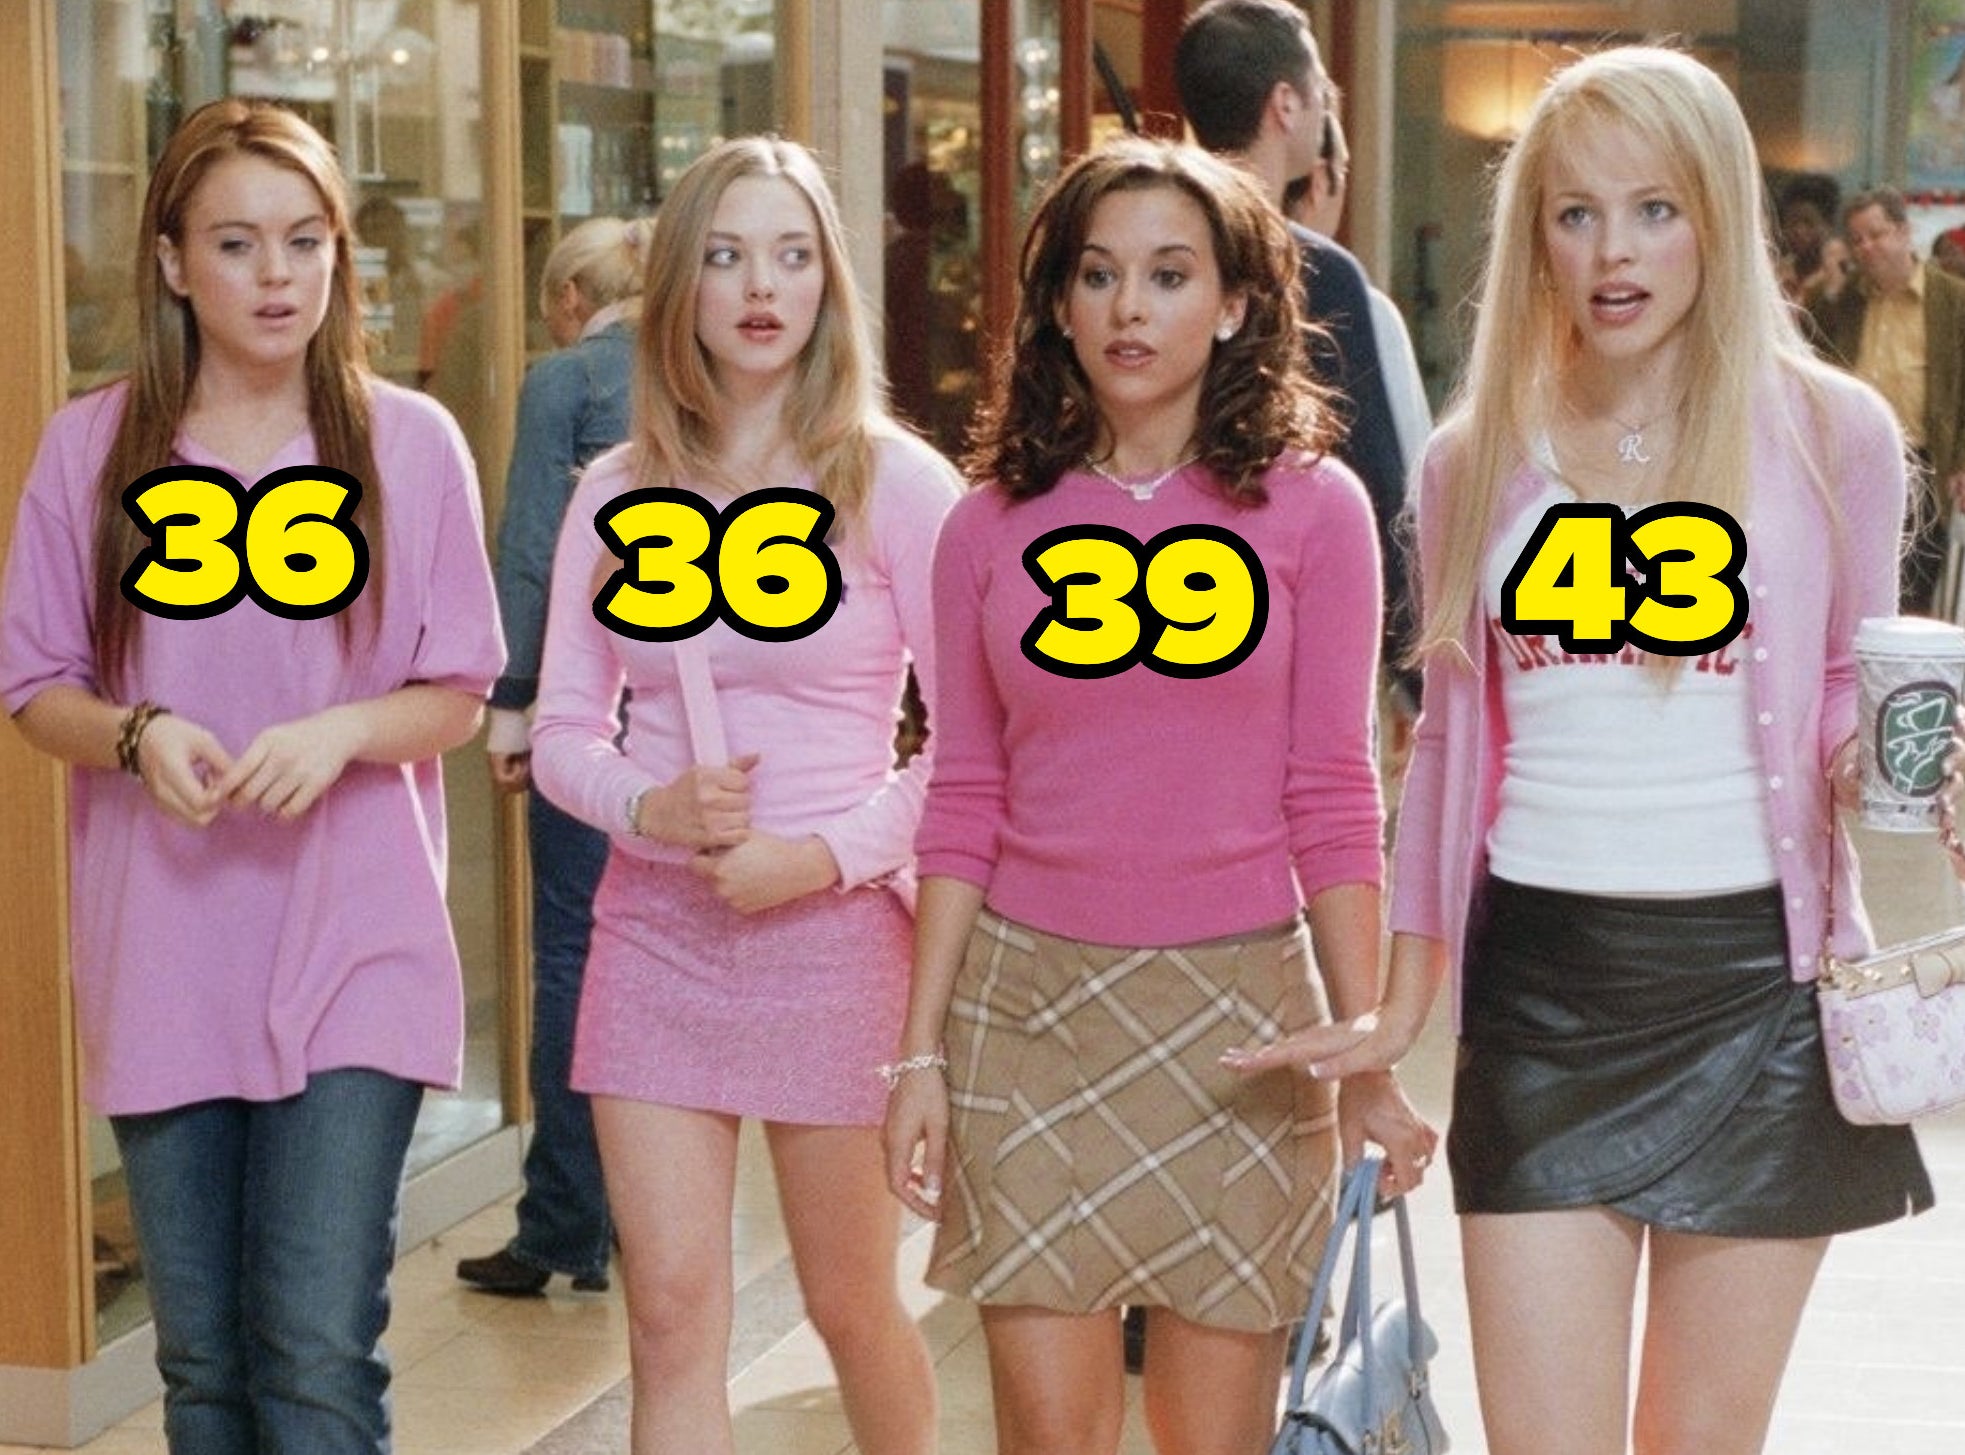 the four girls with the ages 36, 36, 39, and 43 printed on them